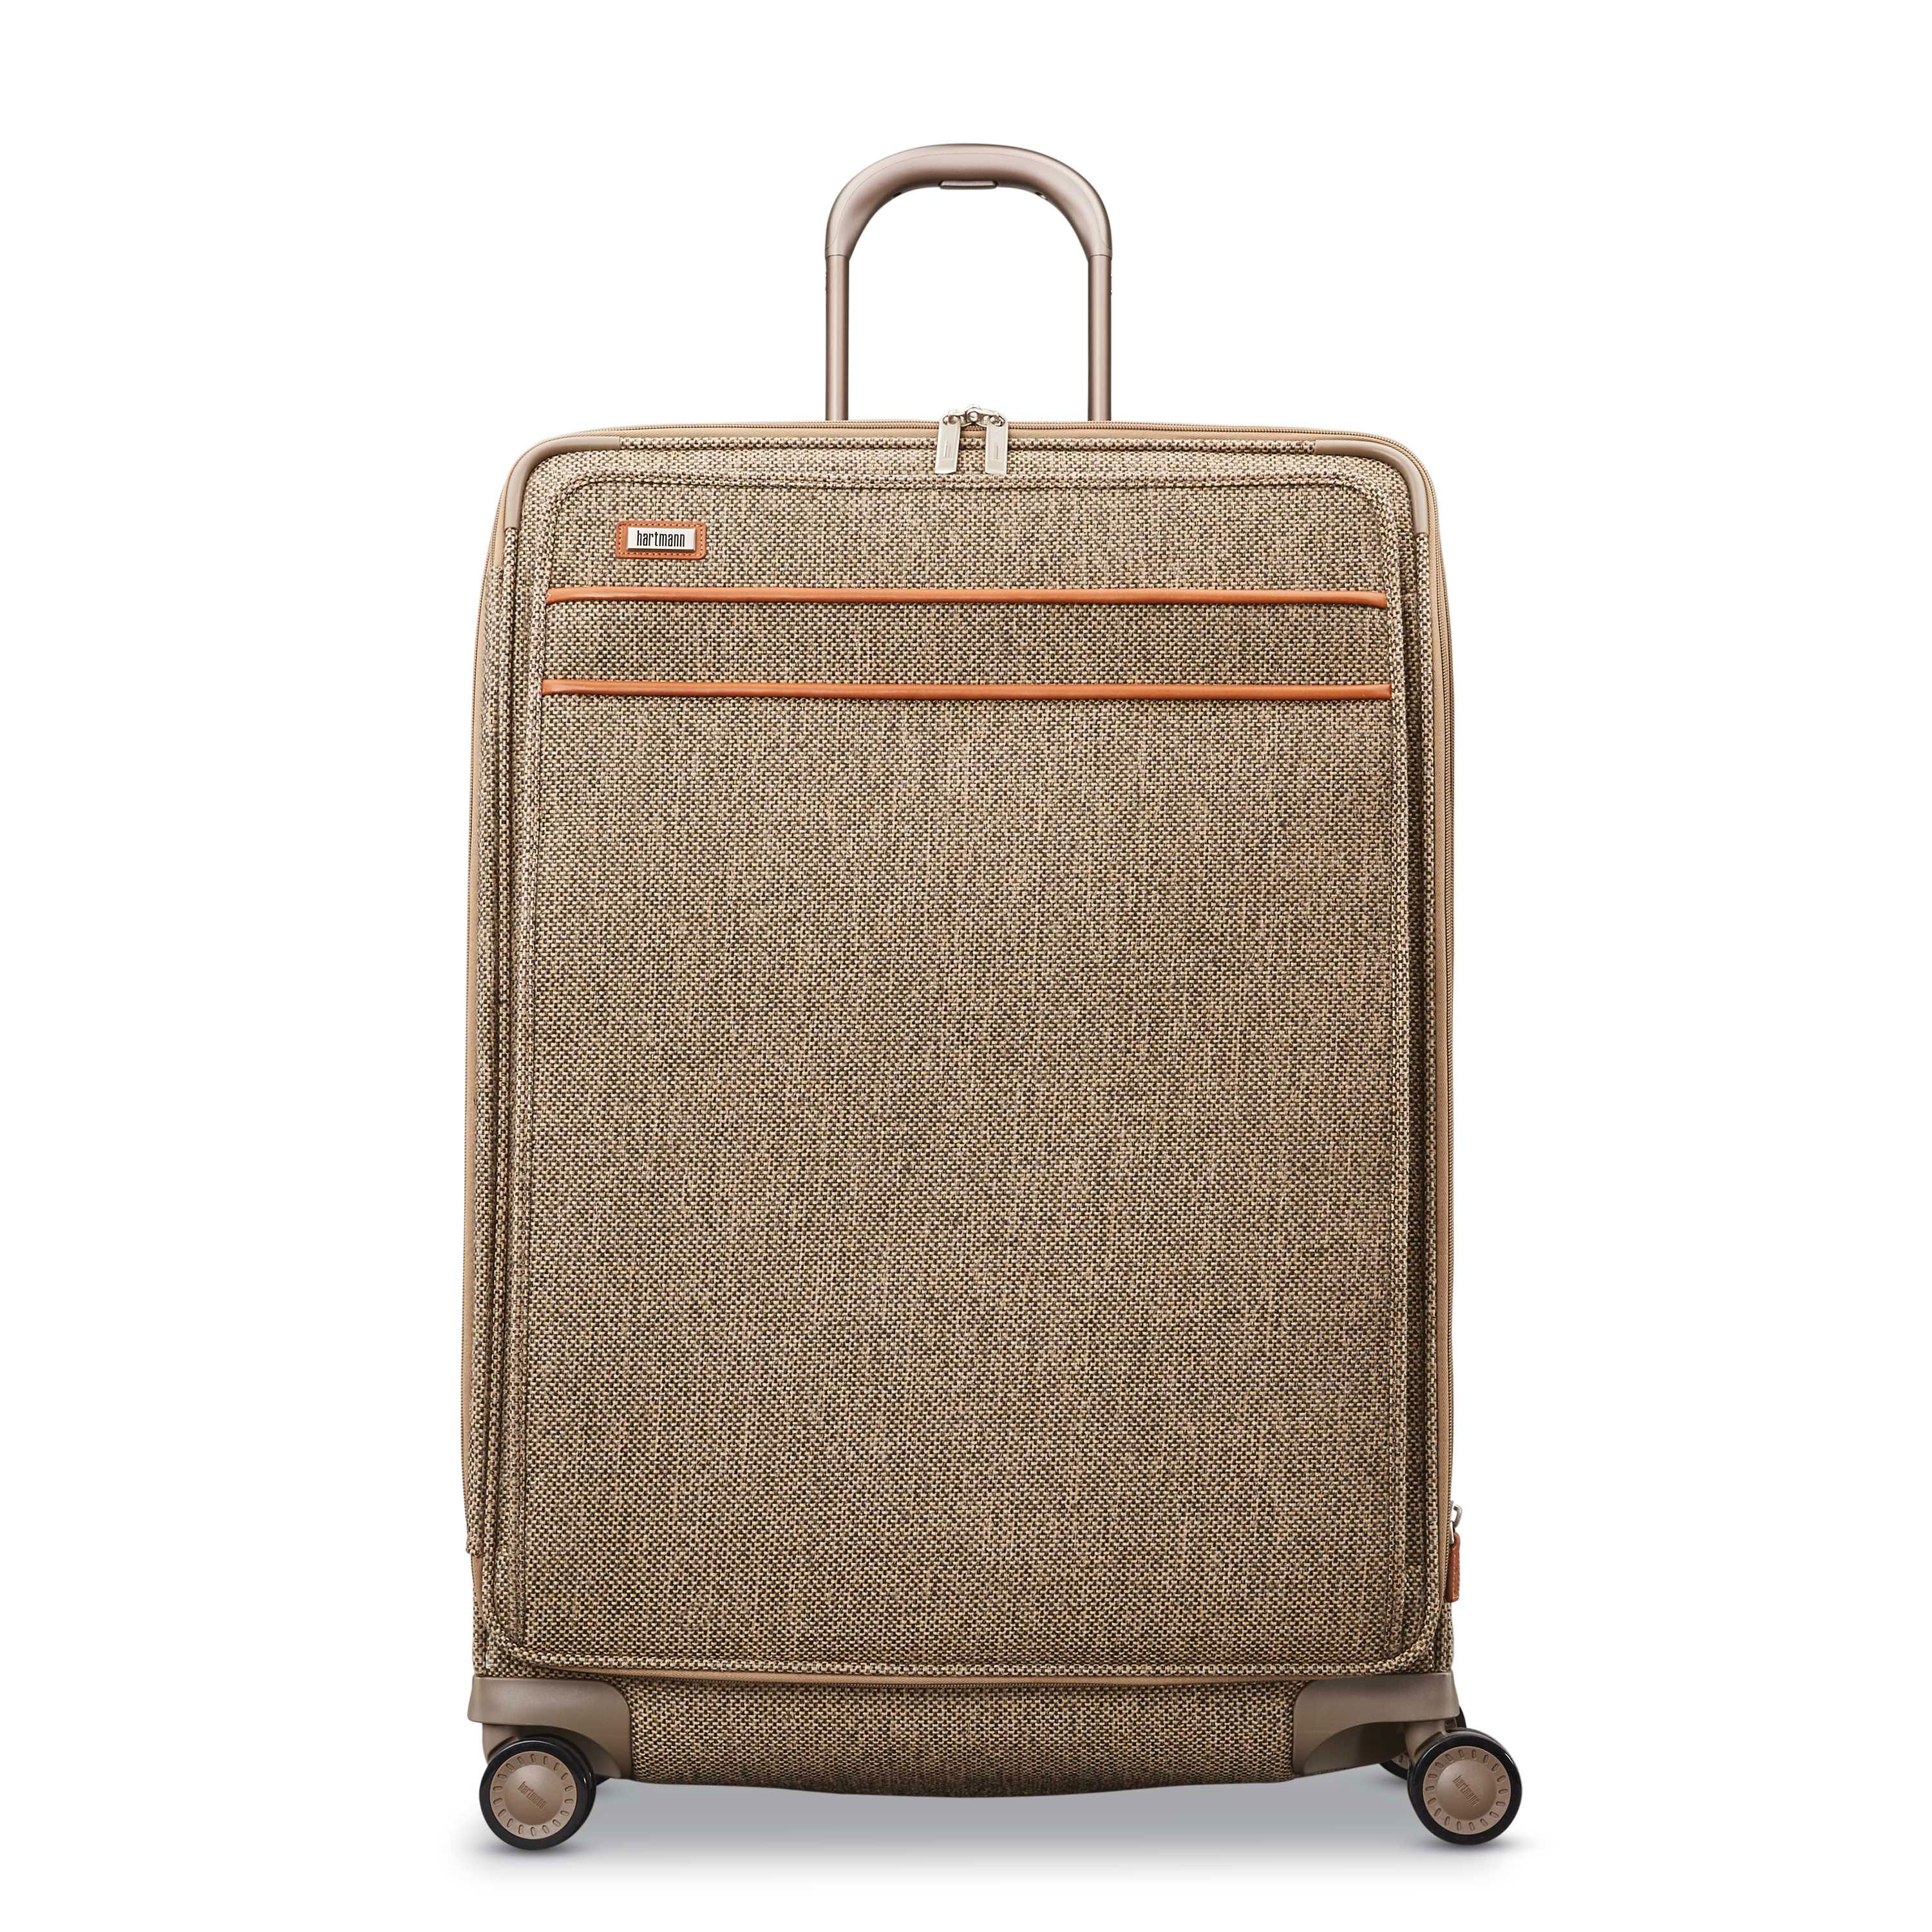 Shop all Collections | Luggage & Bags | Hartmann